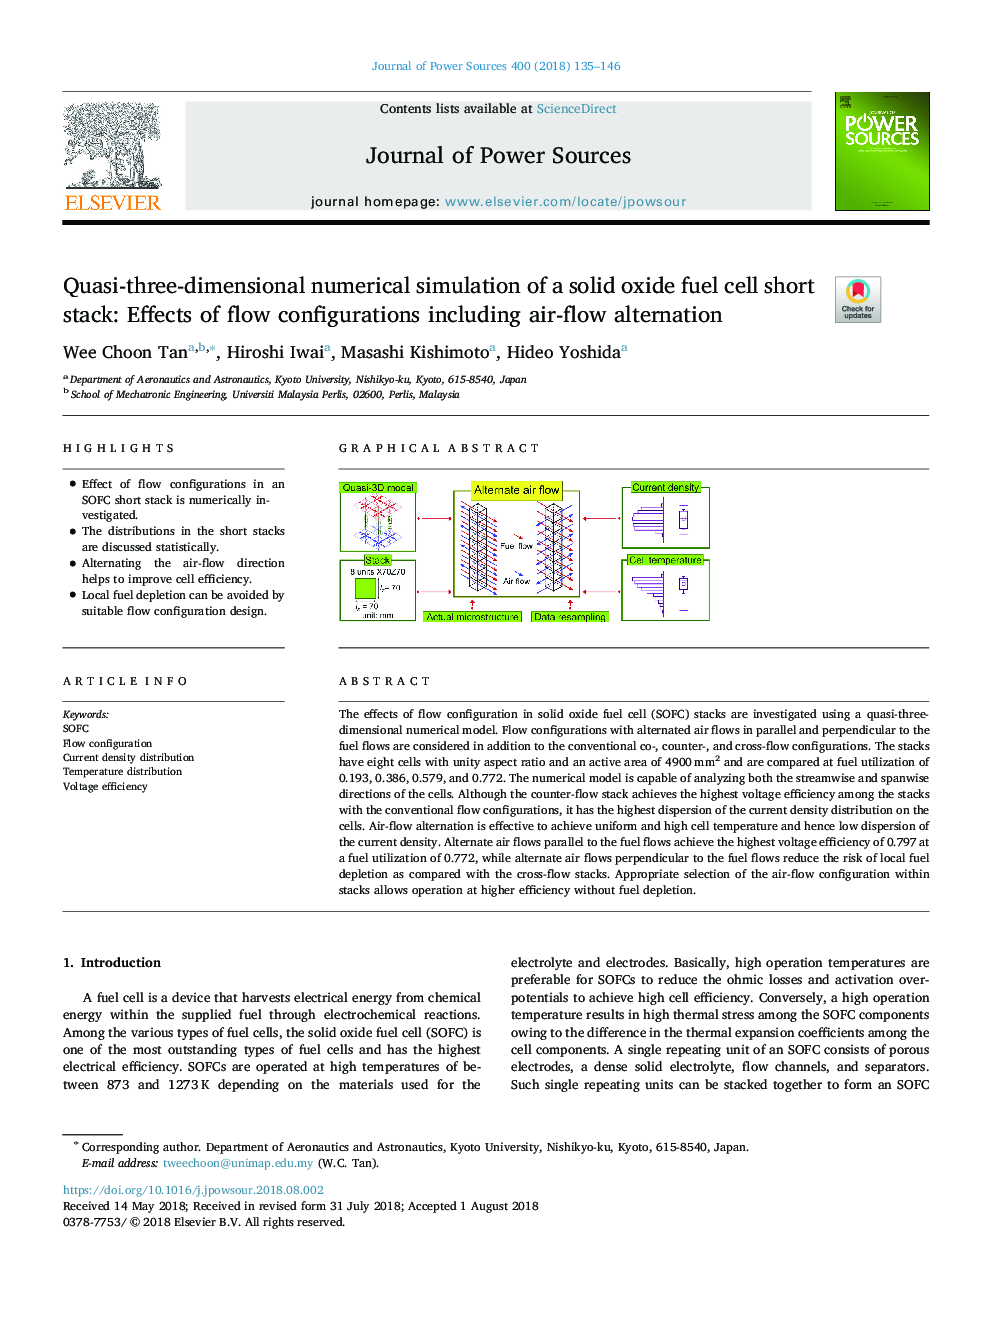 Quasi-three-dimensional numerical simulation of a solid oxide fuel cell short stack: Effects of flow configurations including air-flow alternation